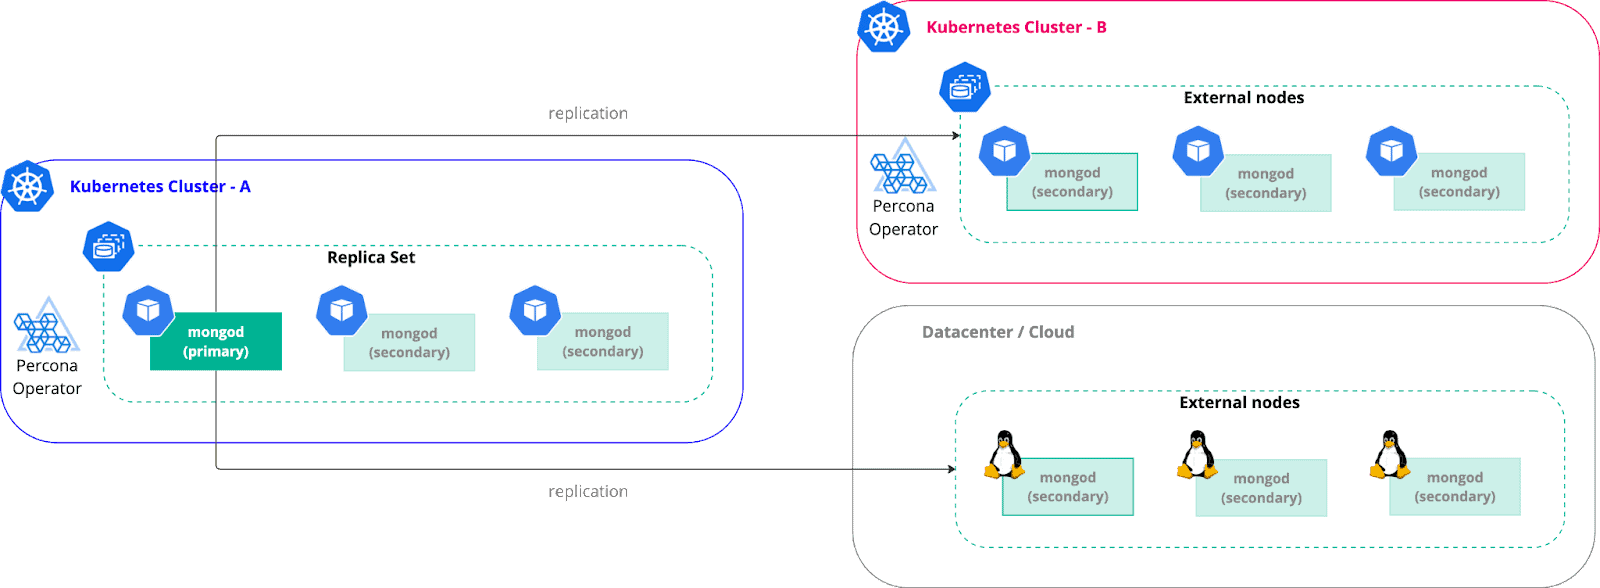 Diagram flow showing Kubernetes Cluster - A to Kubernetes Cluster - B and Datacenter / Cloud